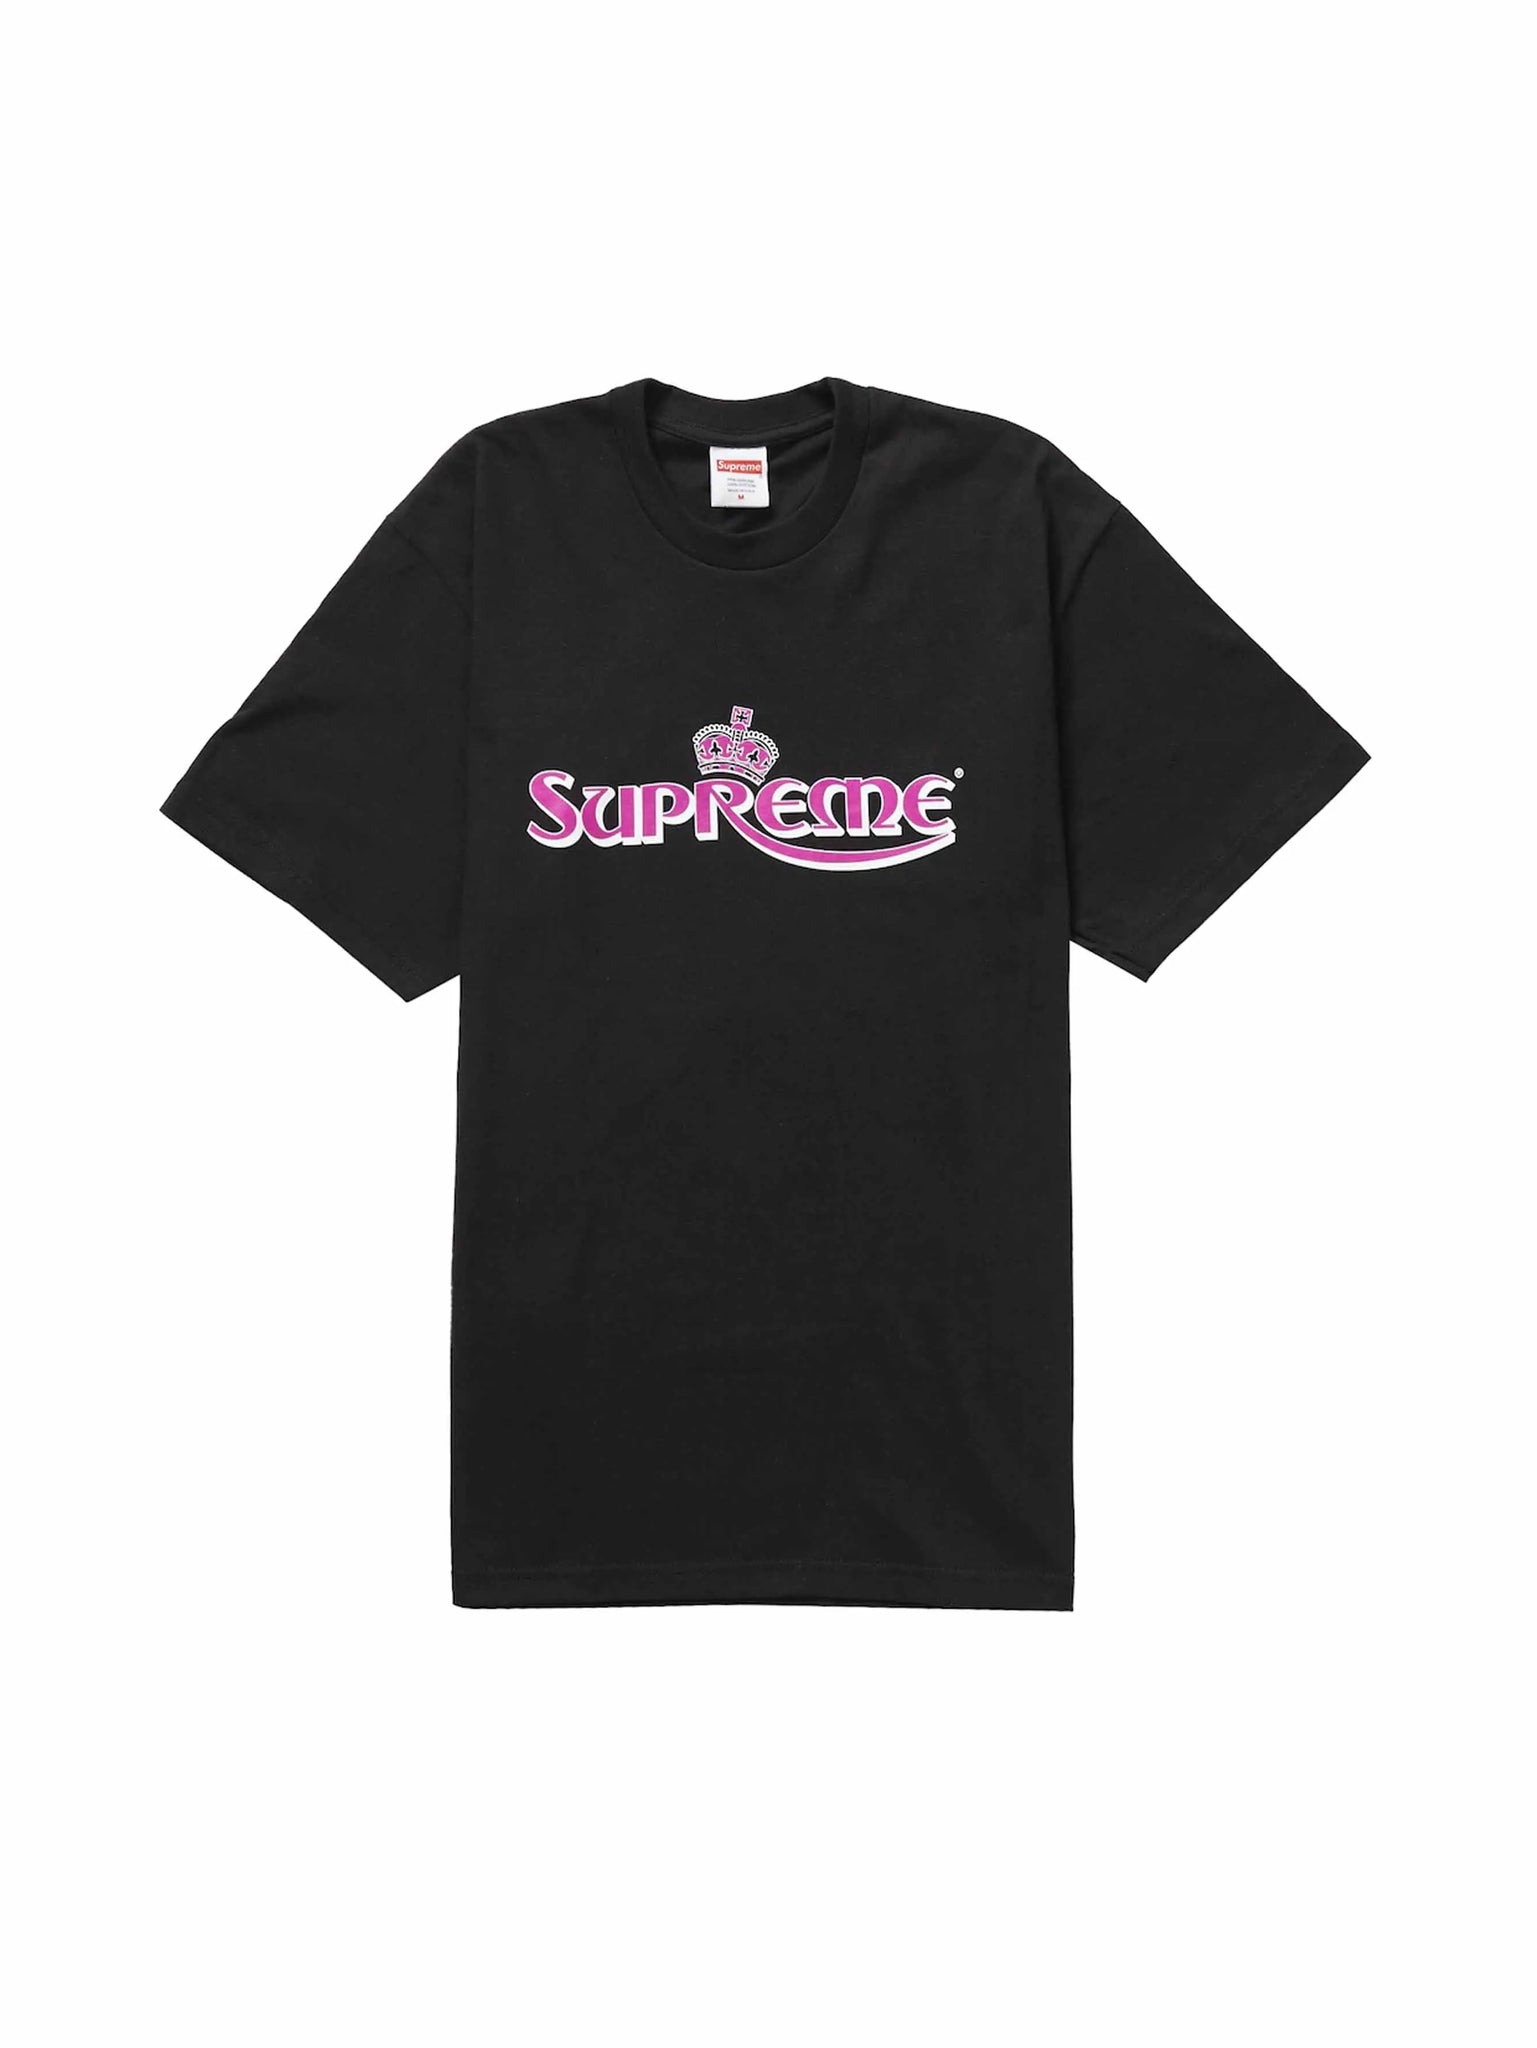 Supreme Crown Tee Black in Auckland, New Zealand - Shop name